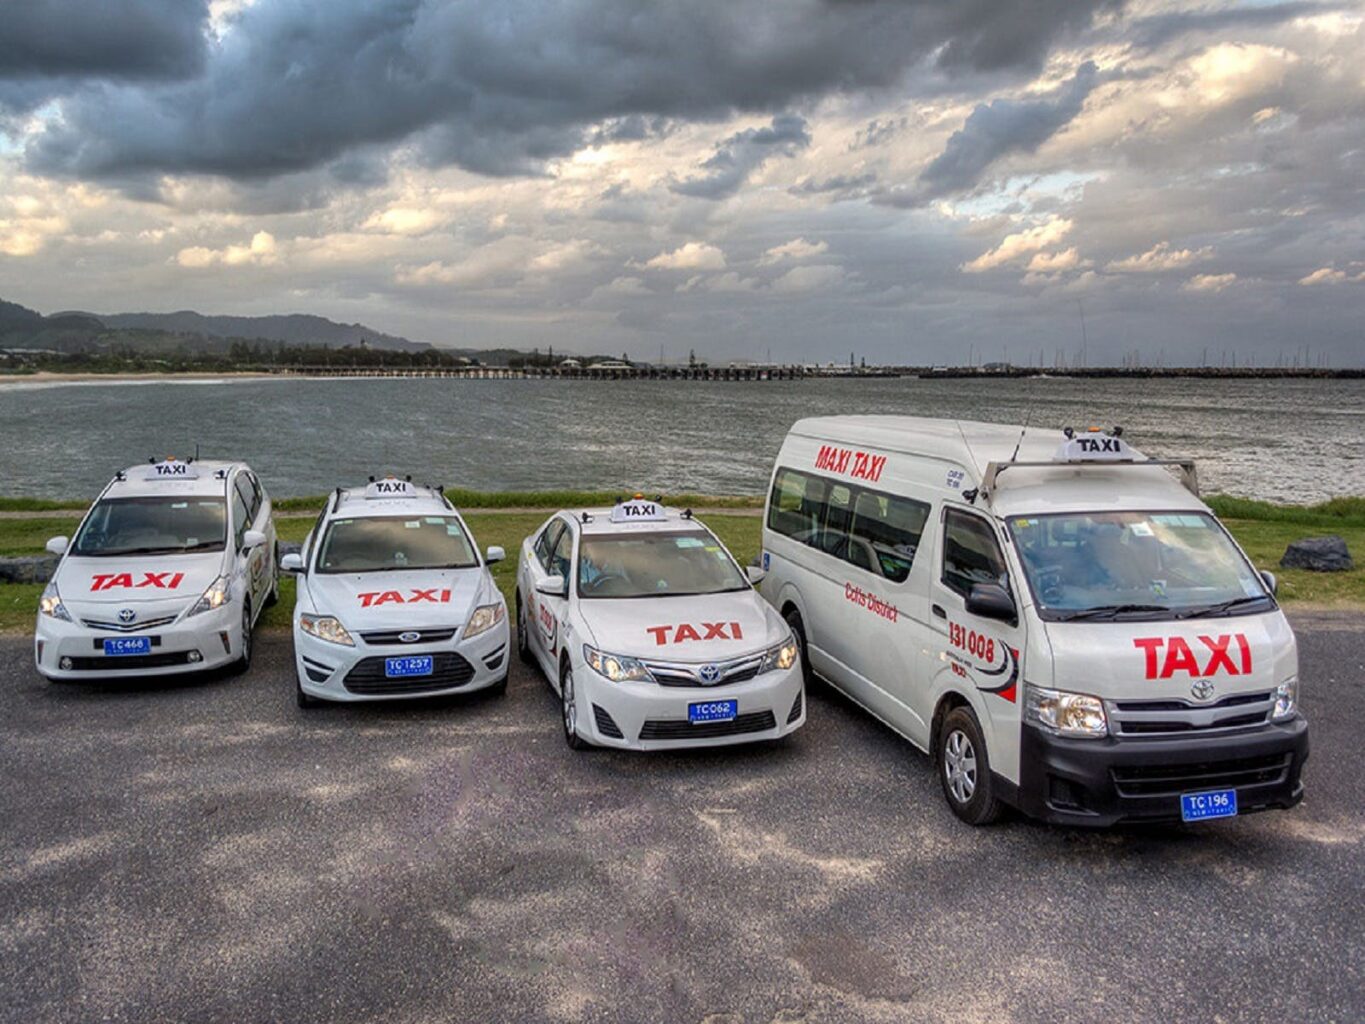 Image of Taxi Fleet in front of the Jetty